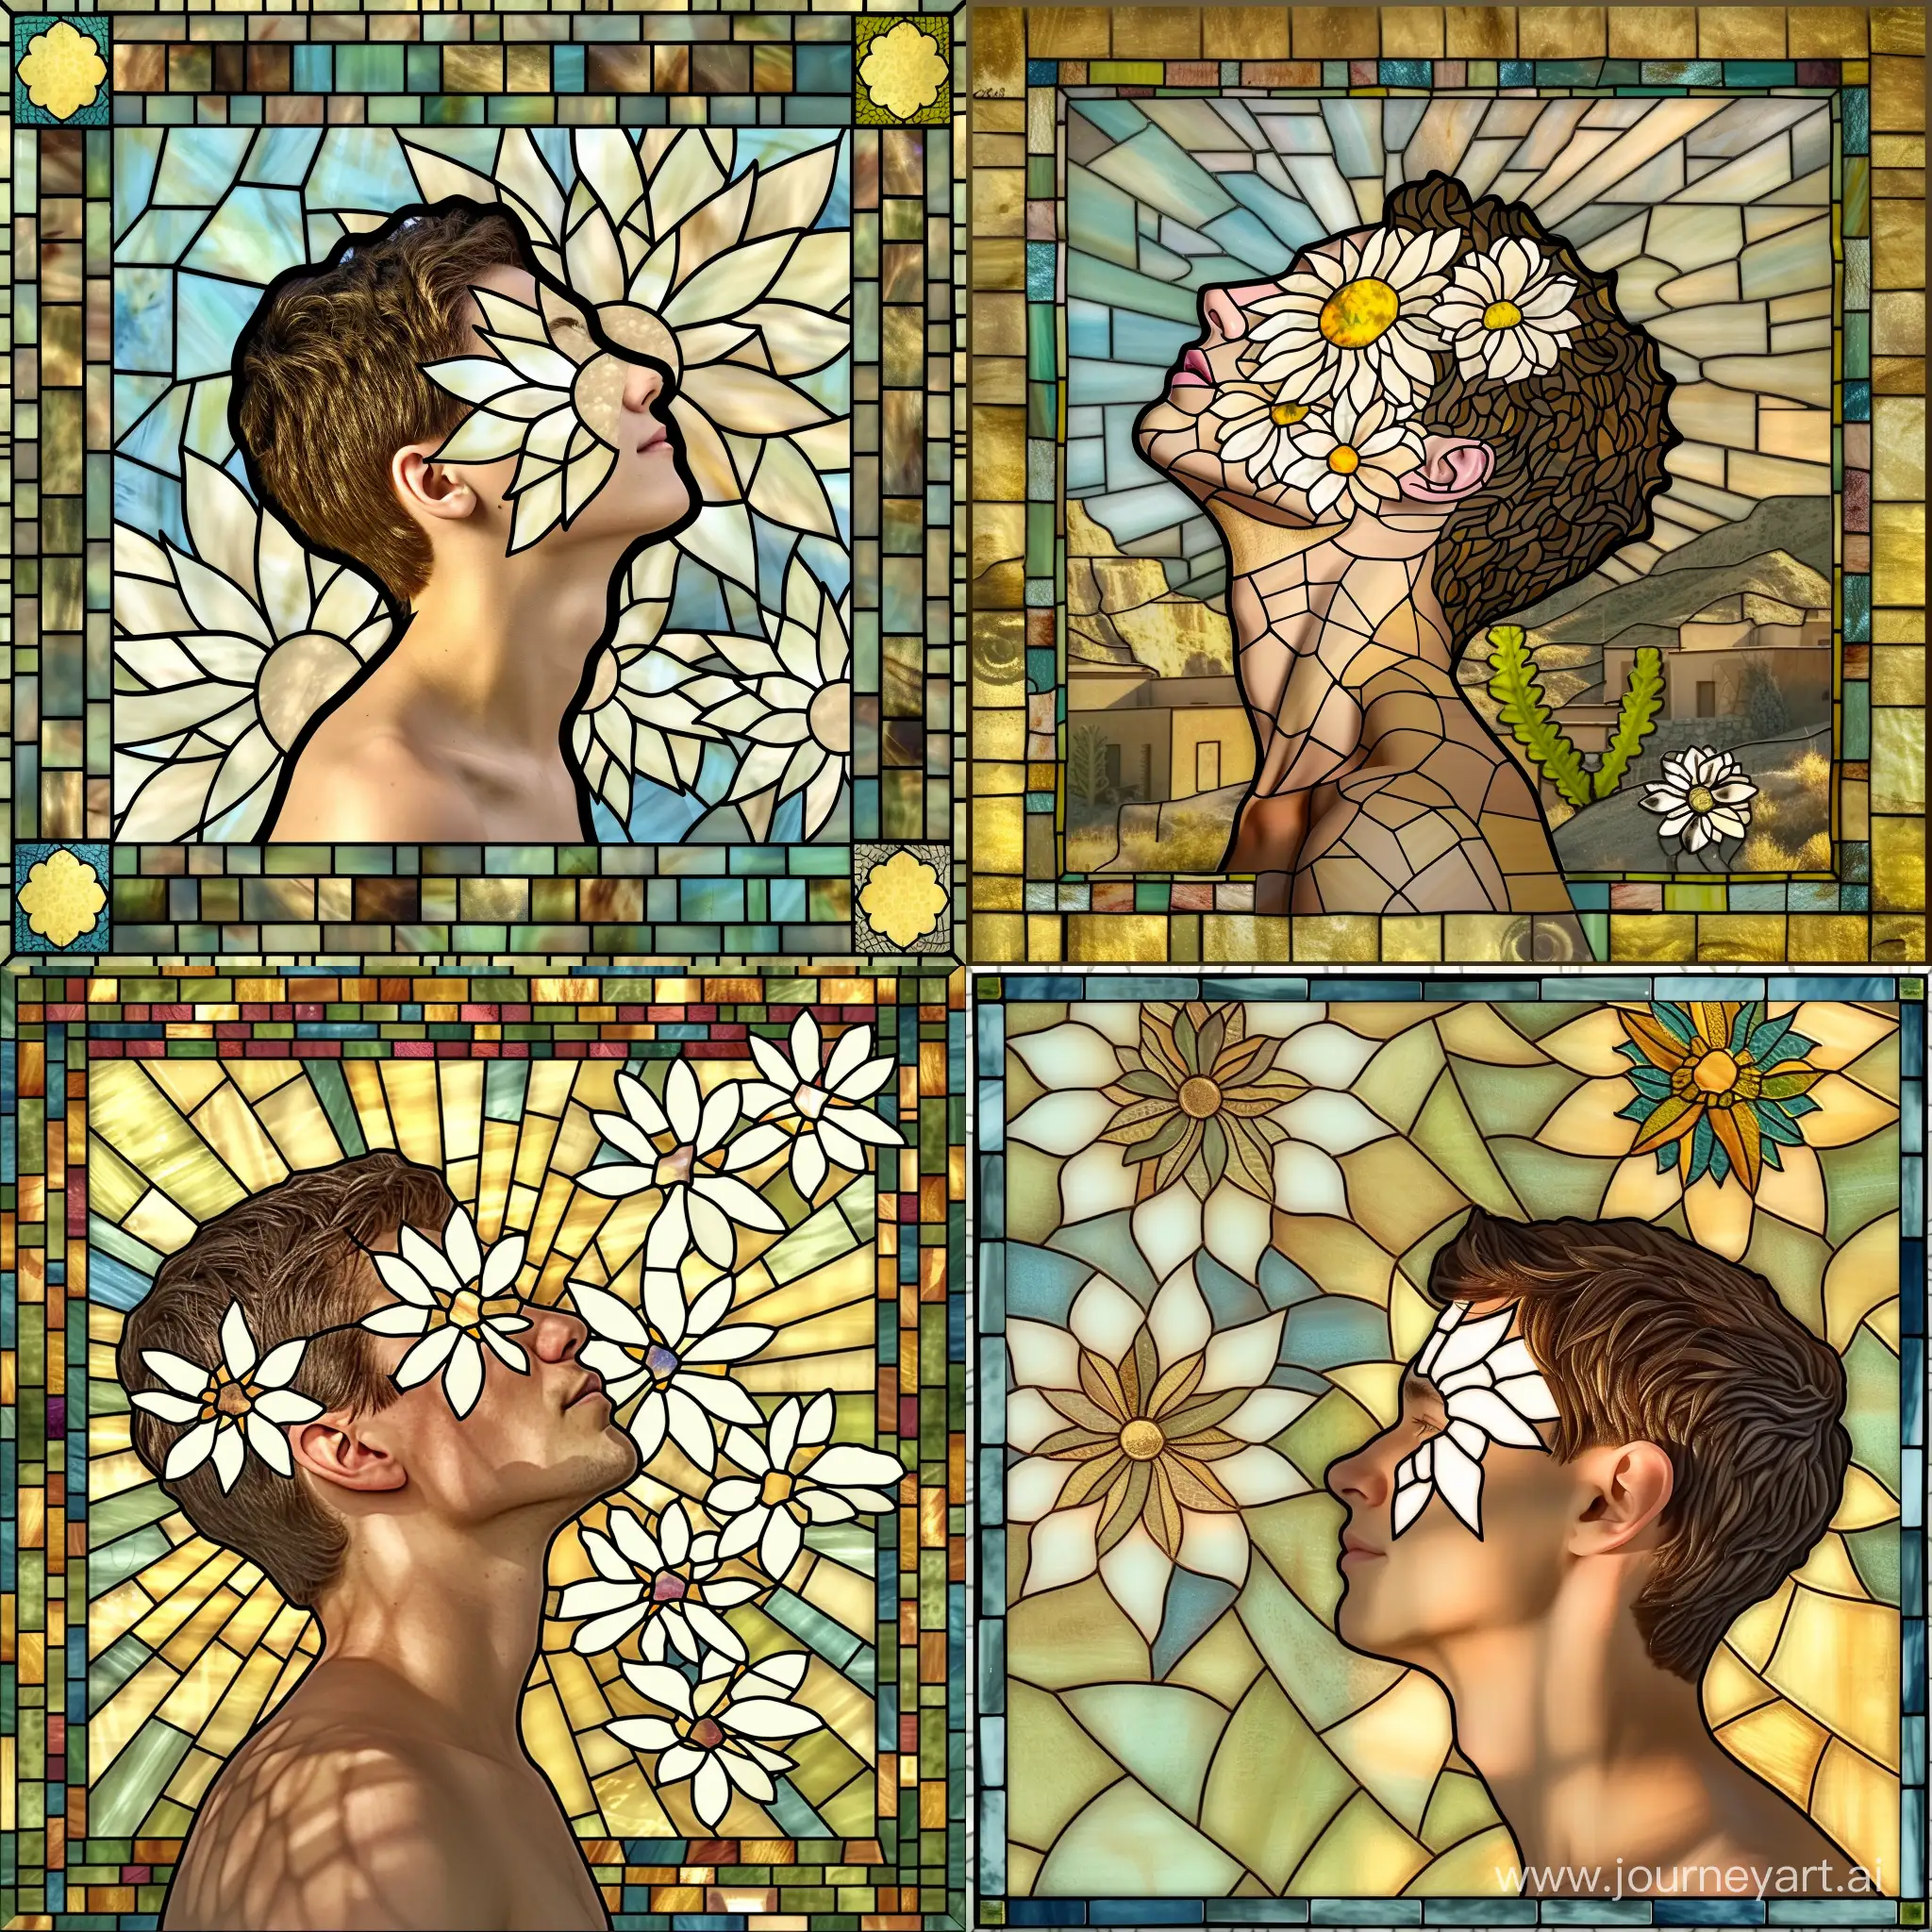 Man-with-White-Flower-Blindfold-in-Stained-Glass-Square-Art